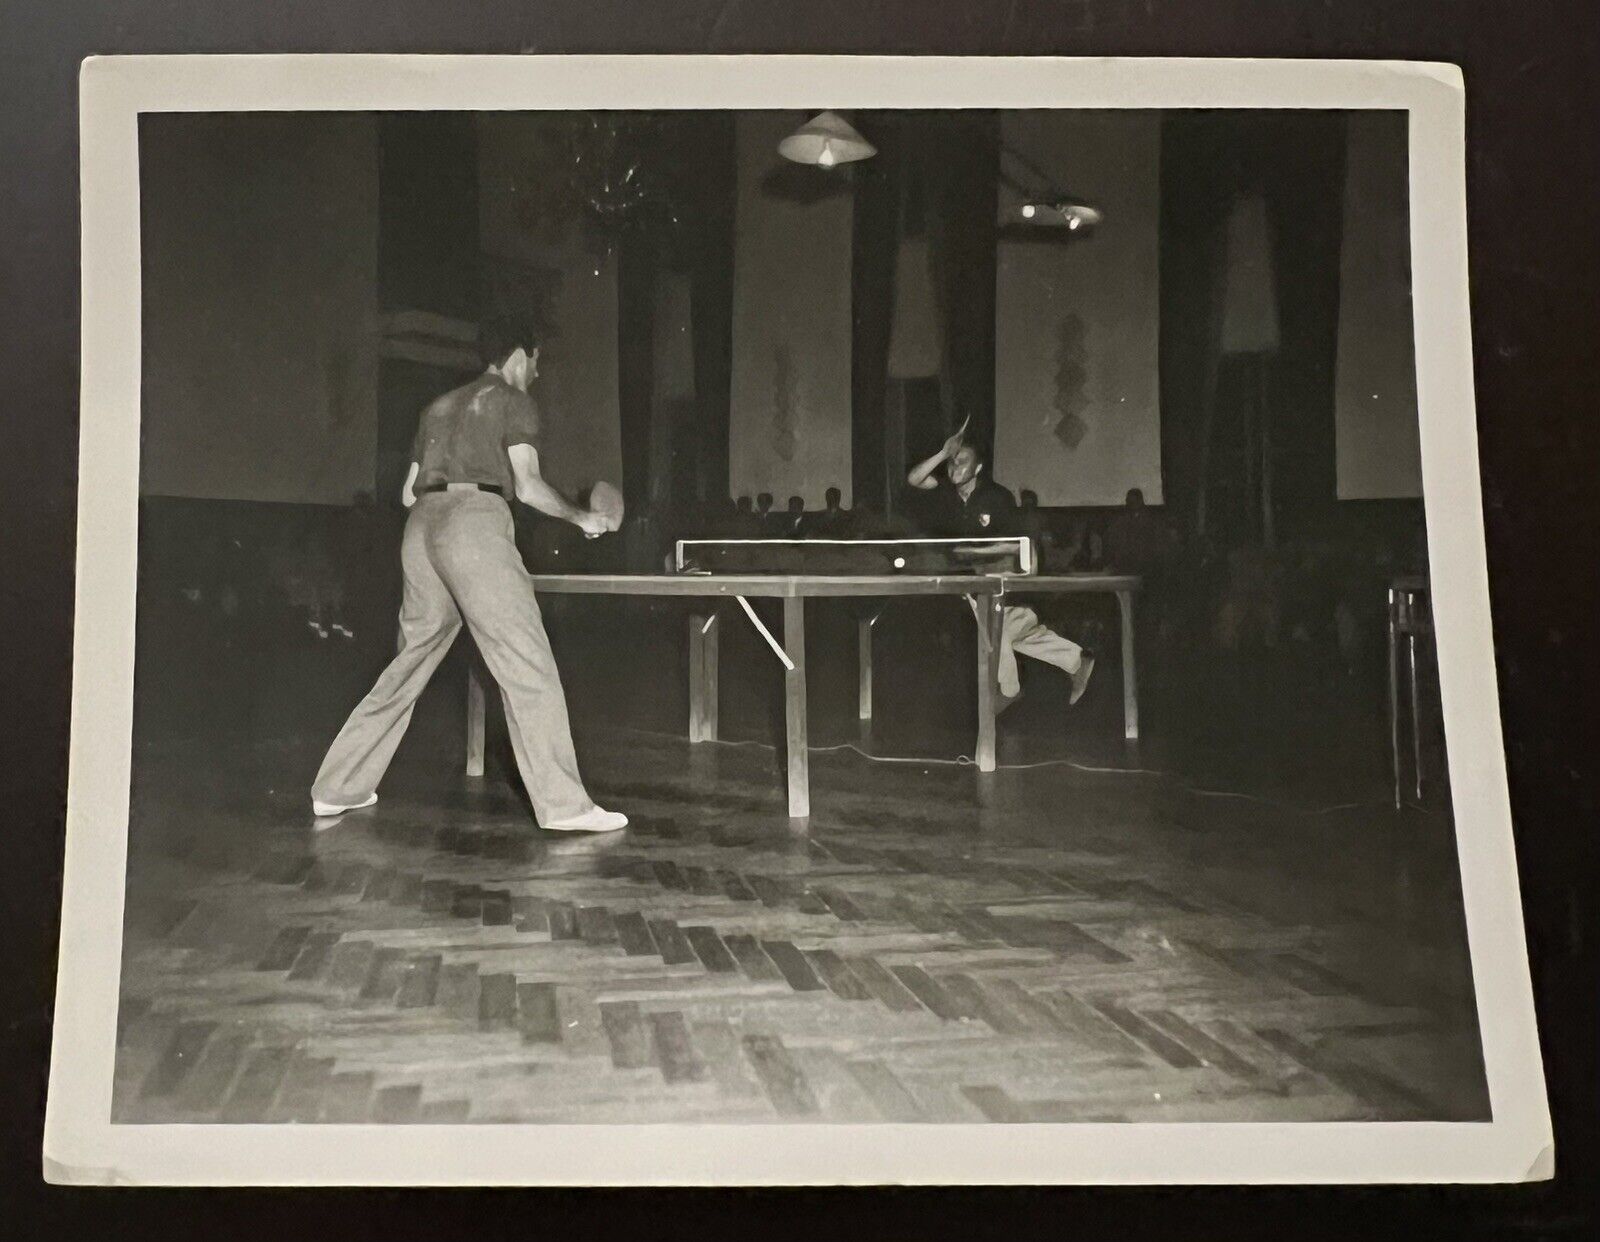 VTG c.1950s Photograph Two Men playing PING PONG Tournament Action Forehand